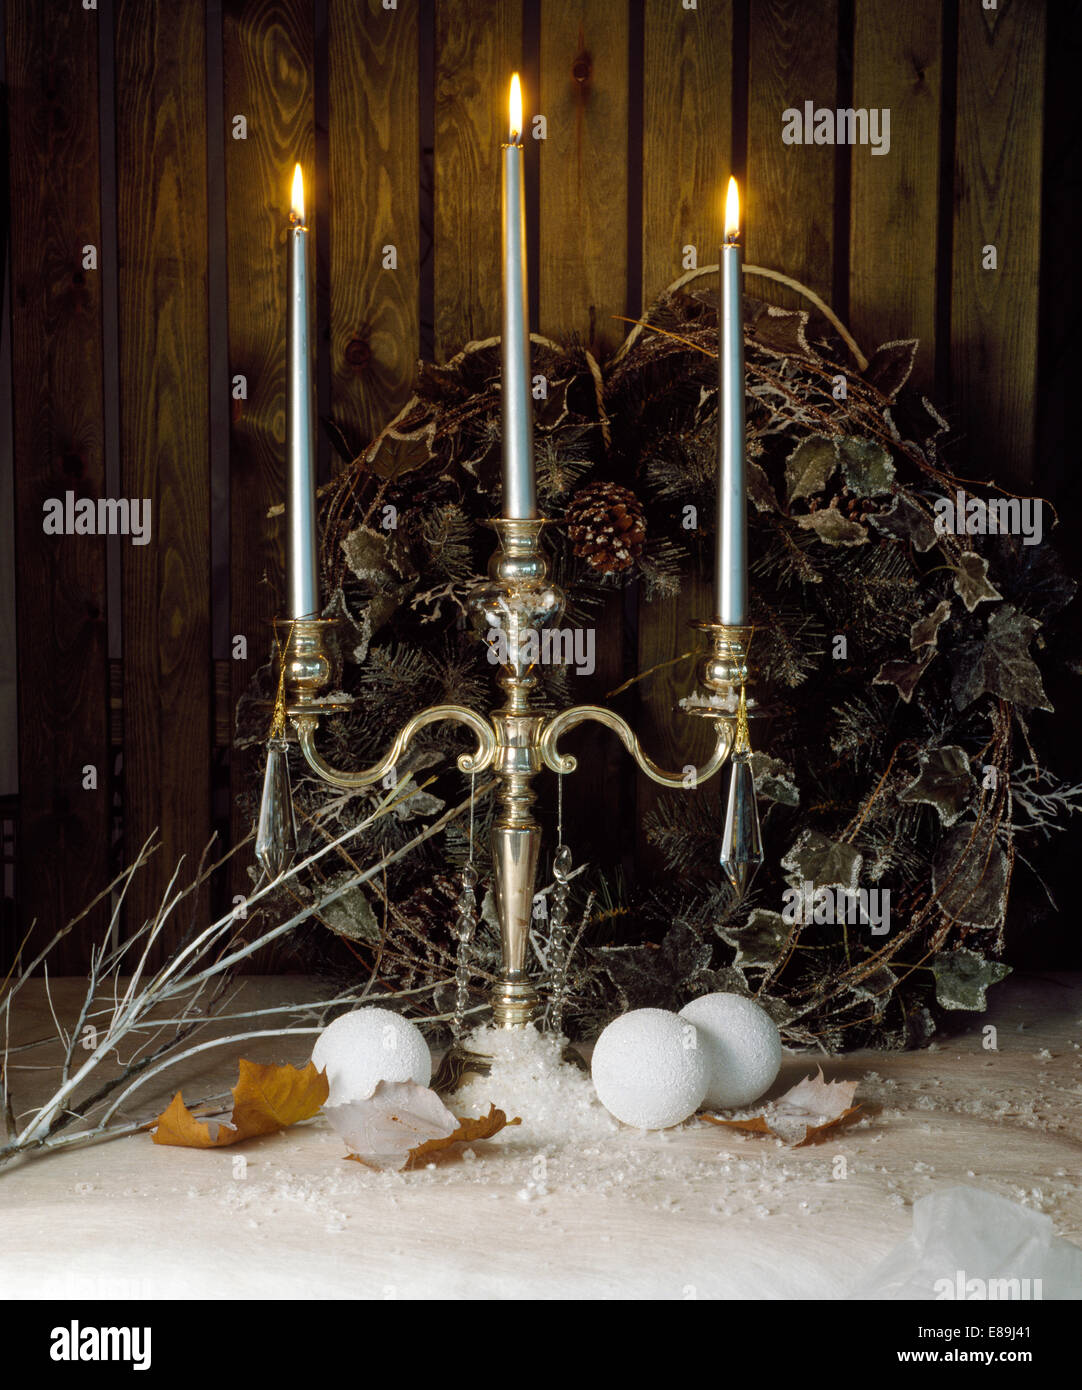 Christmas still-life of silver candelabra with lighted silver candles on table with frosted ivy and conifer wreath Stock Photo